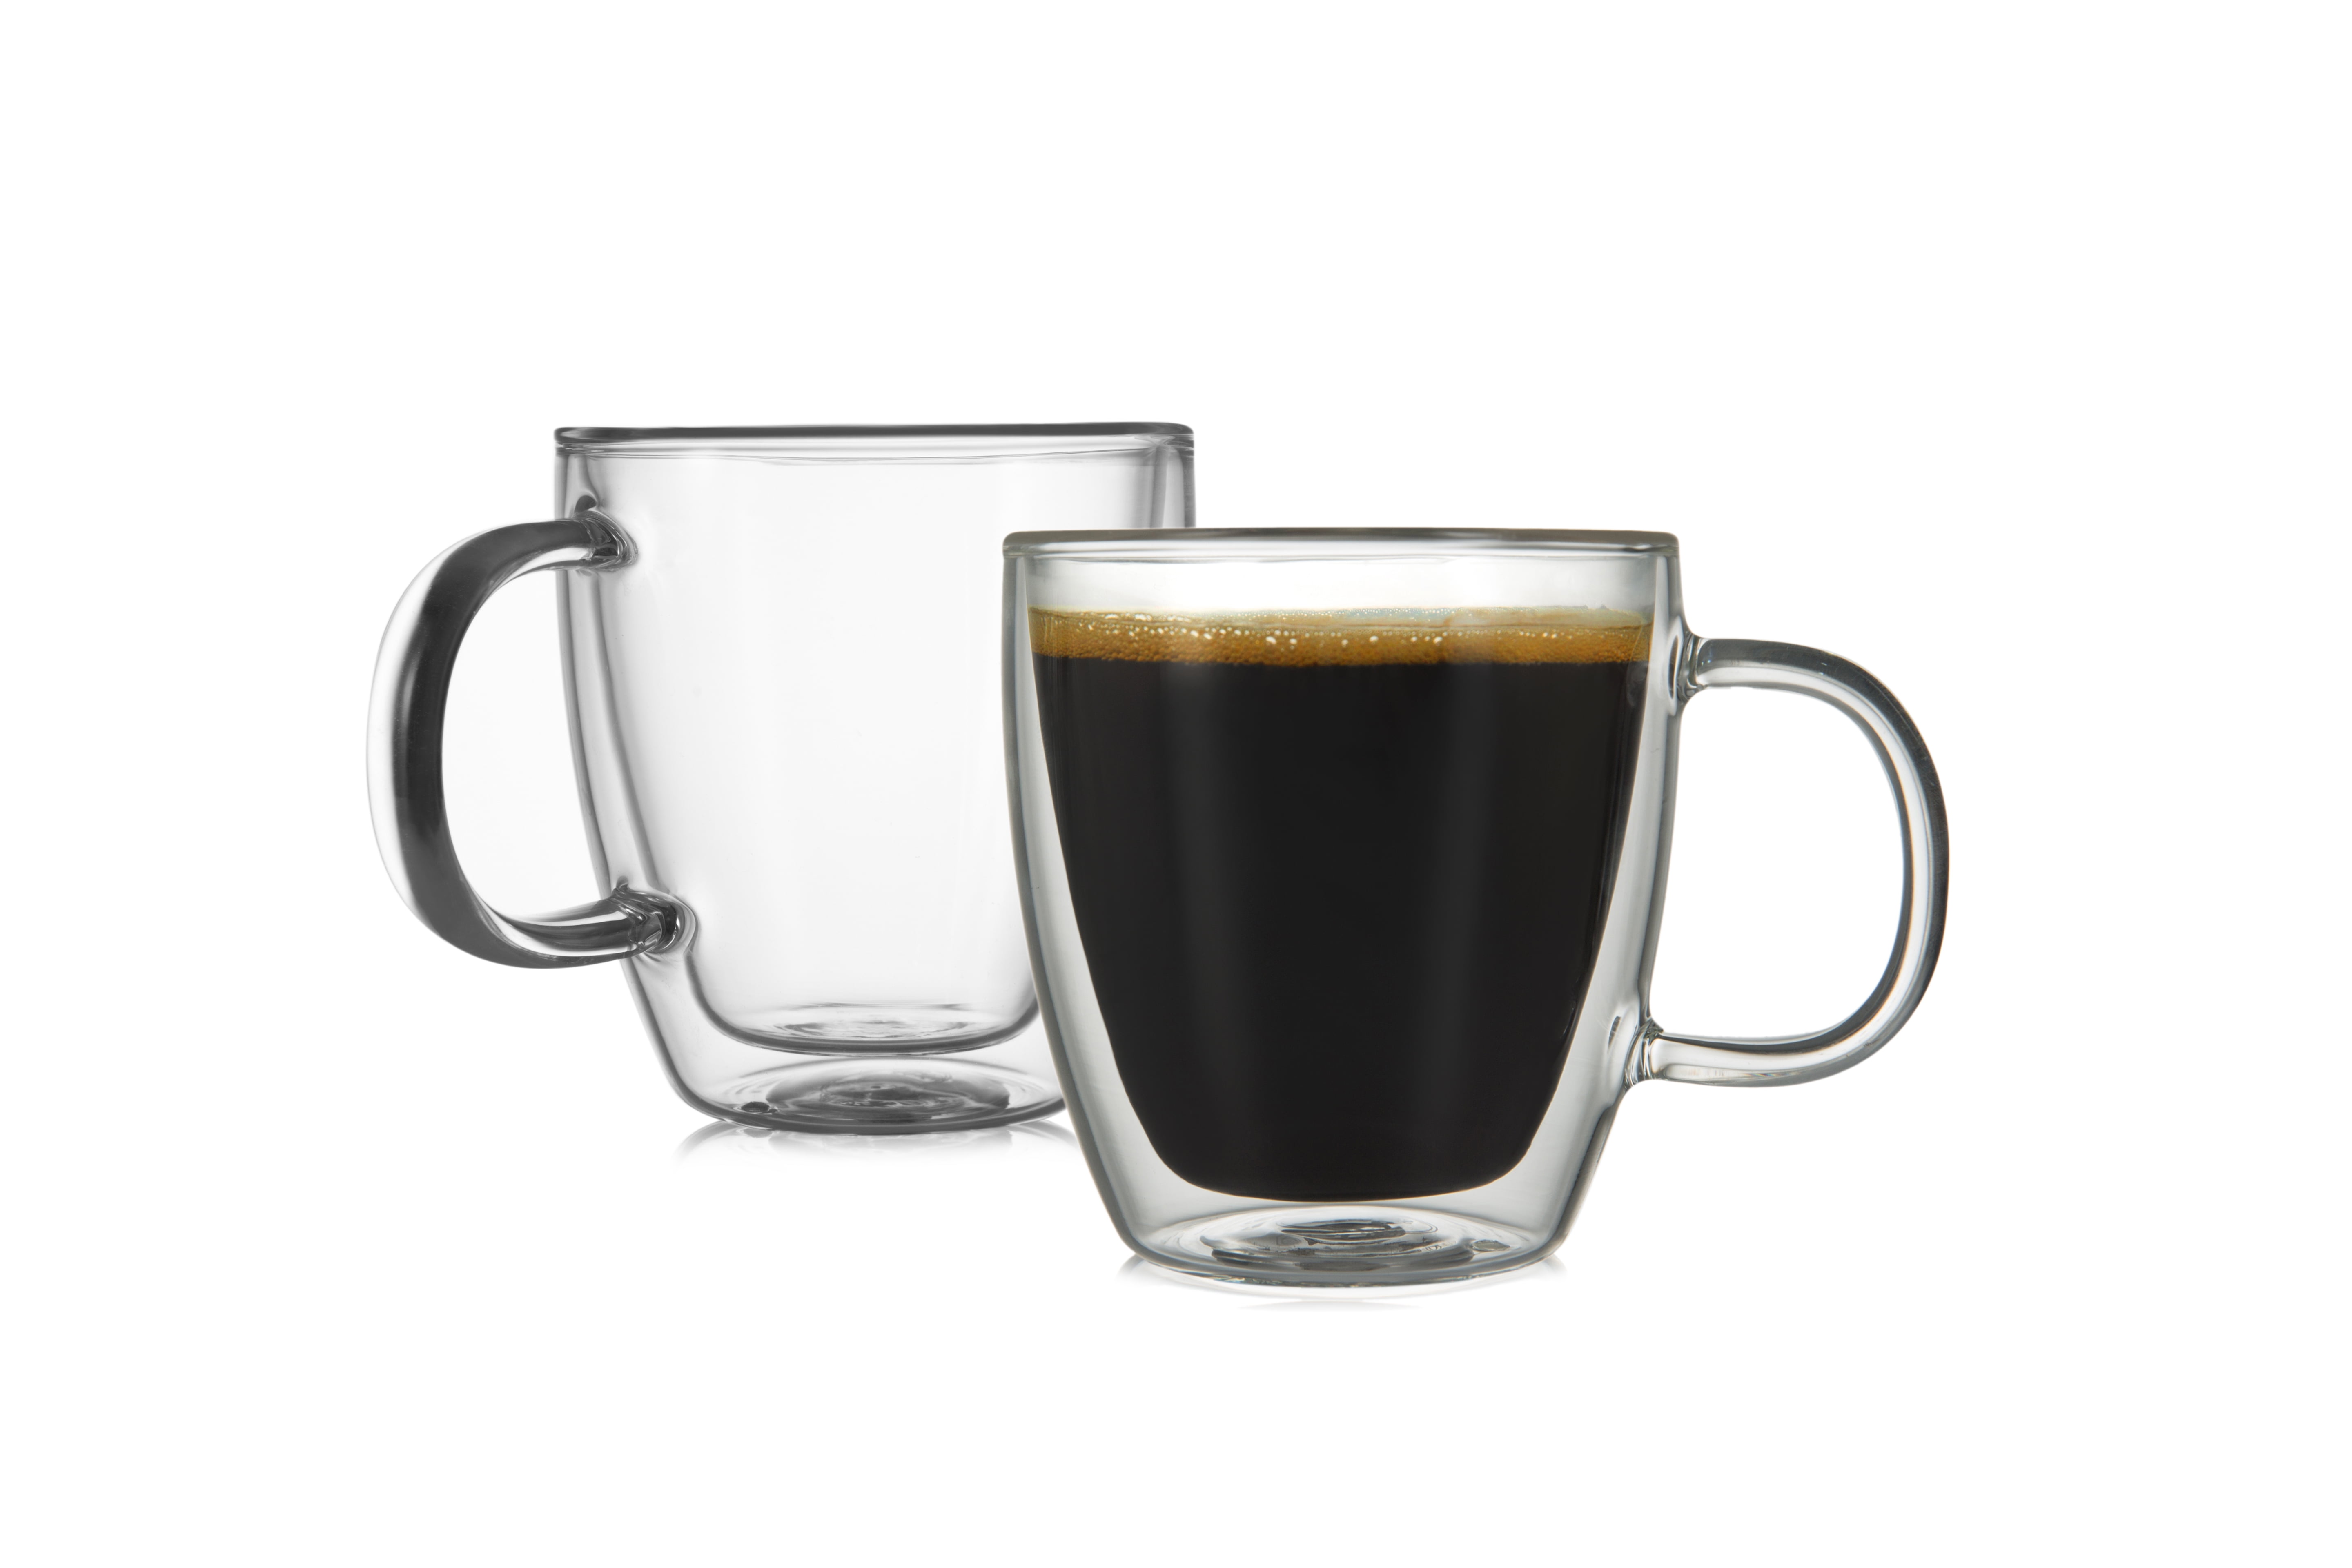 UpNew Style Double Wall Glass Coffee Mugs 9 oz - Double Walled Glass Cup  Set of 2 - Clear Insulated …See more UpNew Style Double Wall Glass Coffee